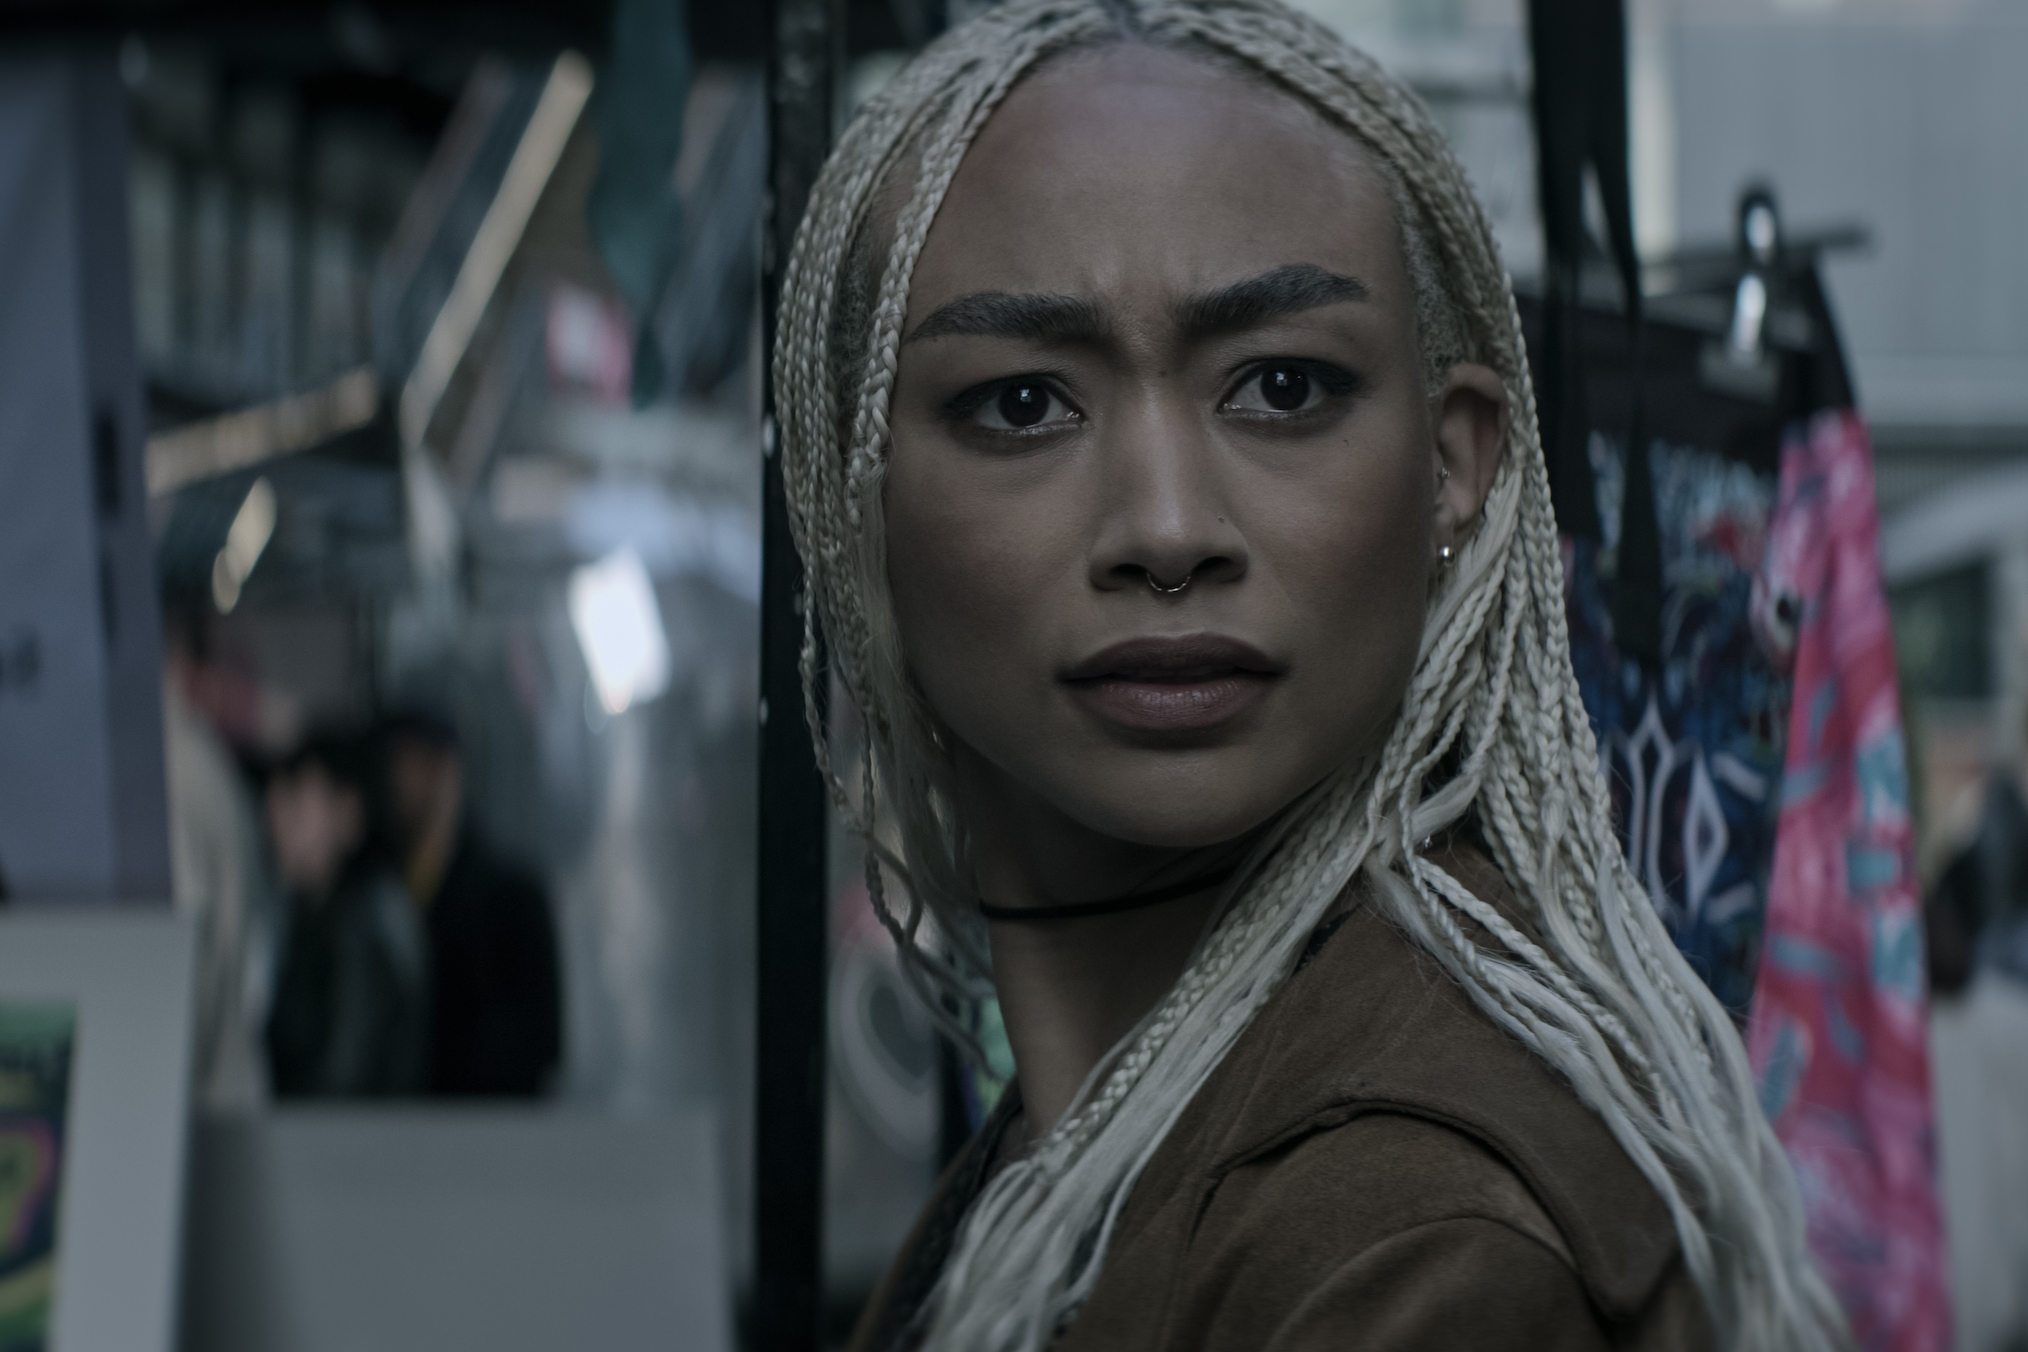 Tati Gabrielle's Parents Steered Her Towards a Career in the Film Industry